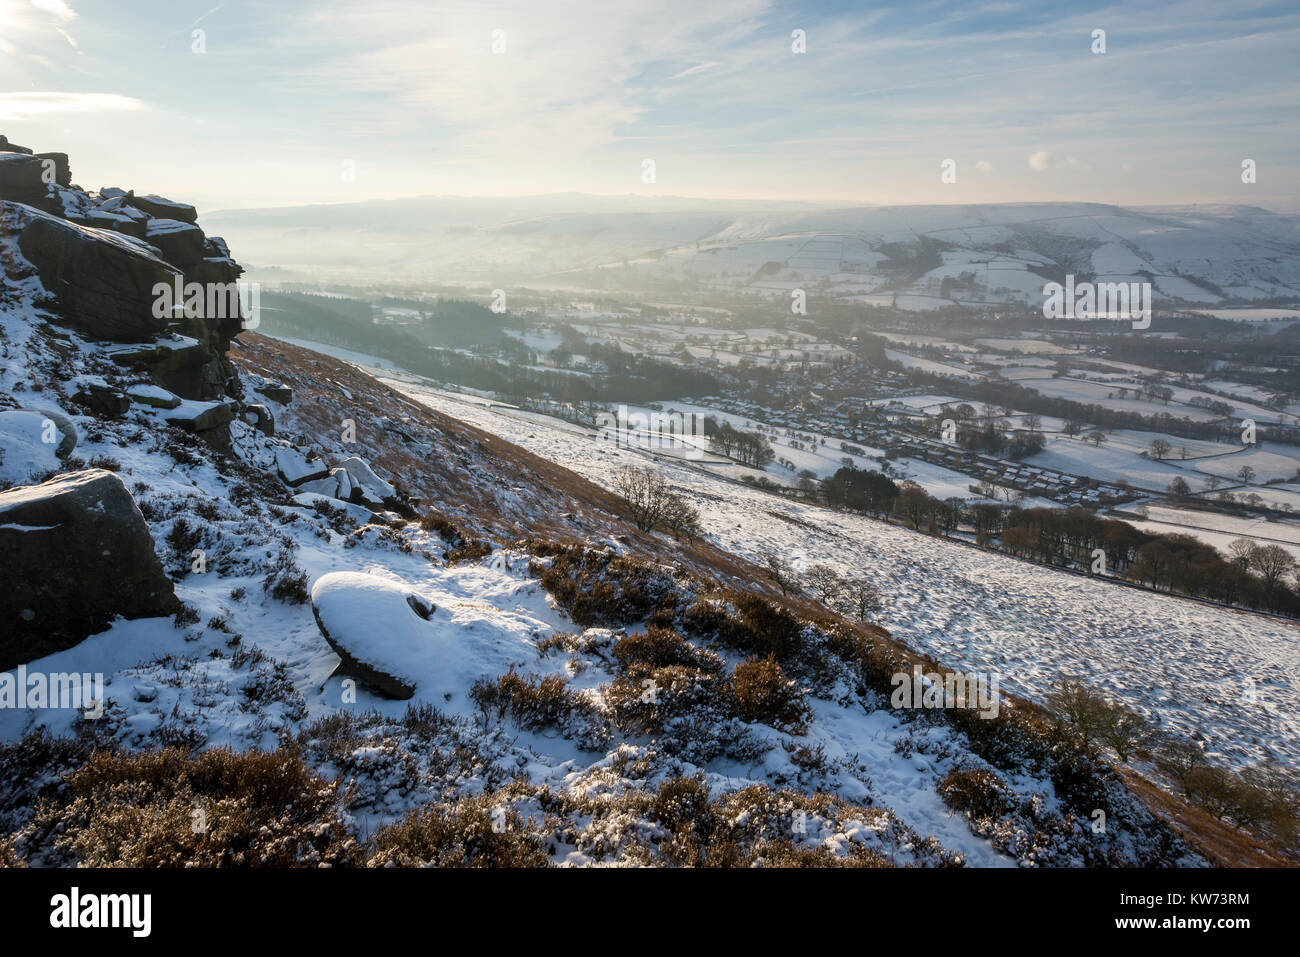 Snow covered abandoned millstone on Derwent edge in the Peak District, Derbyshire, England. Stock Photo